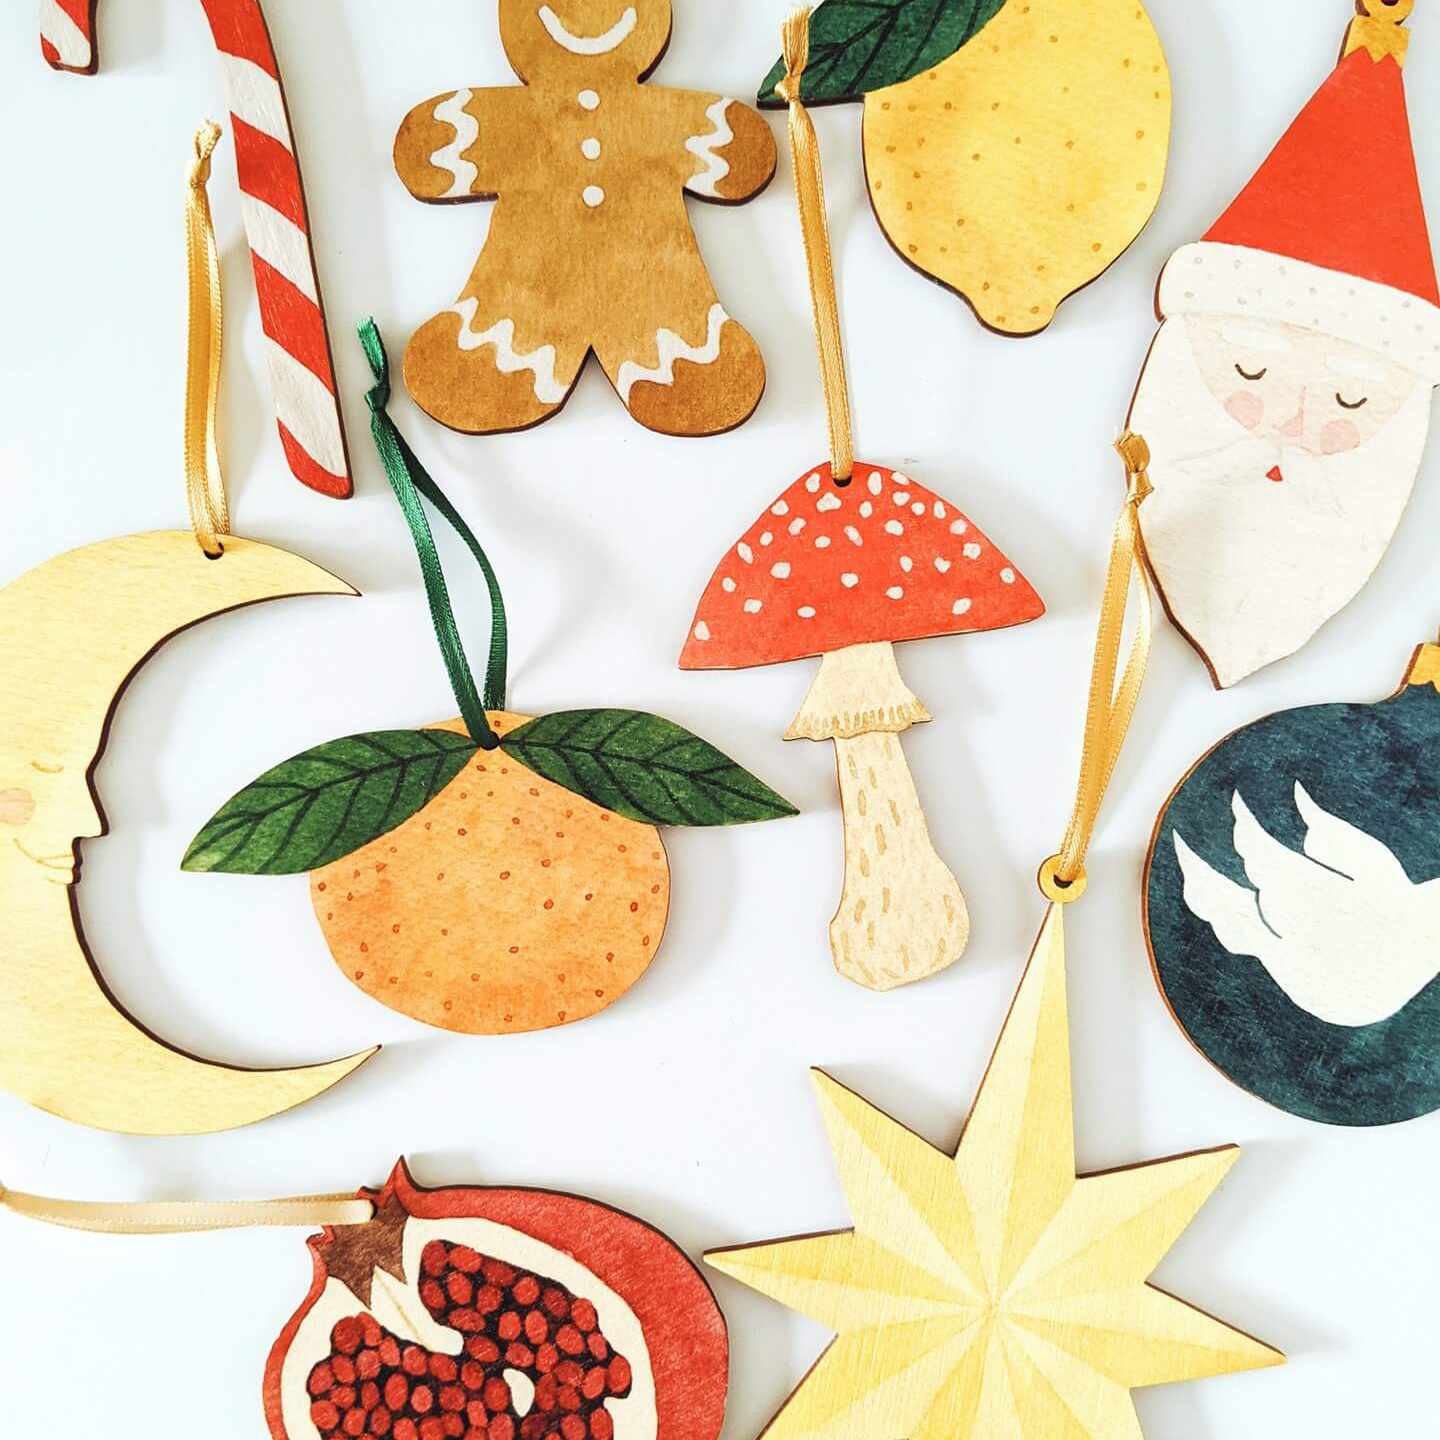 New product: Christmas tree decorations